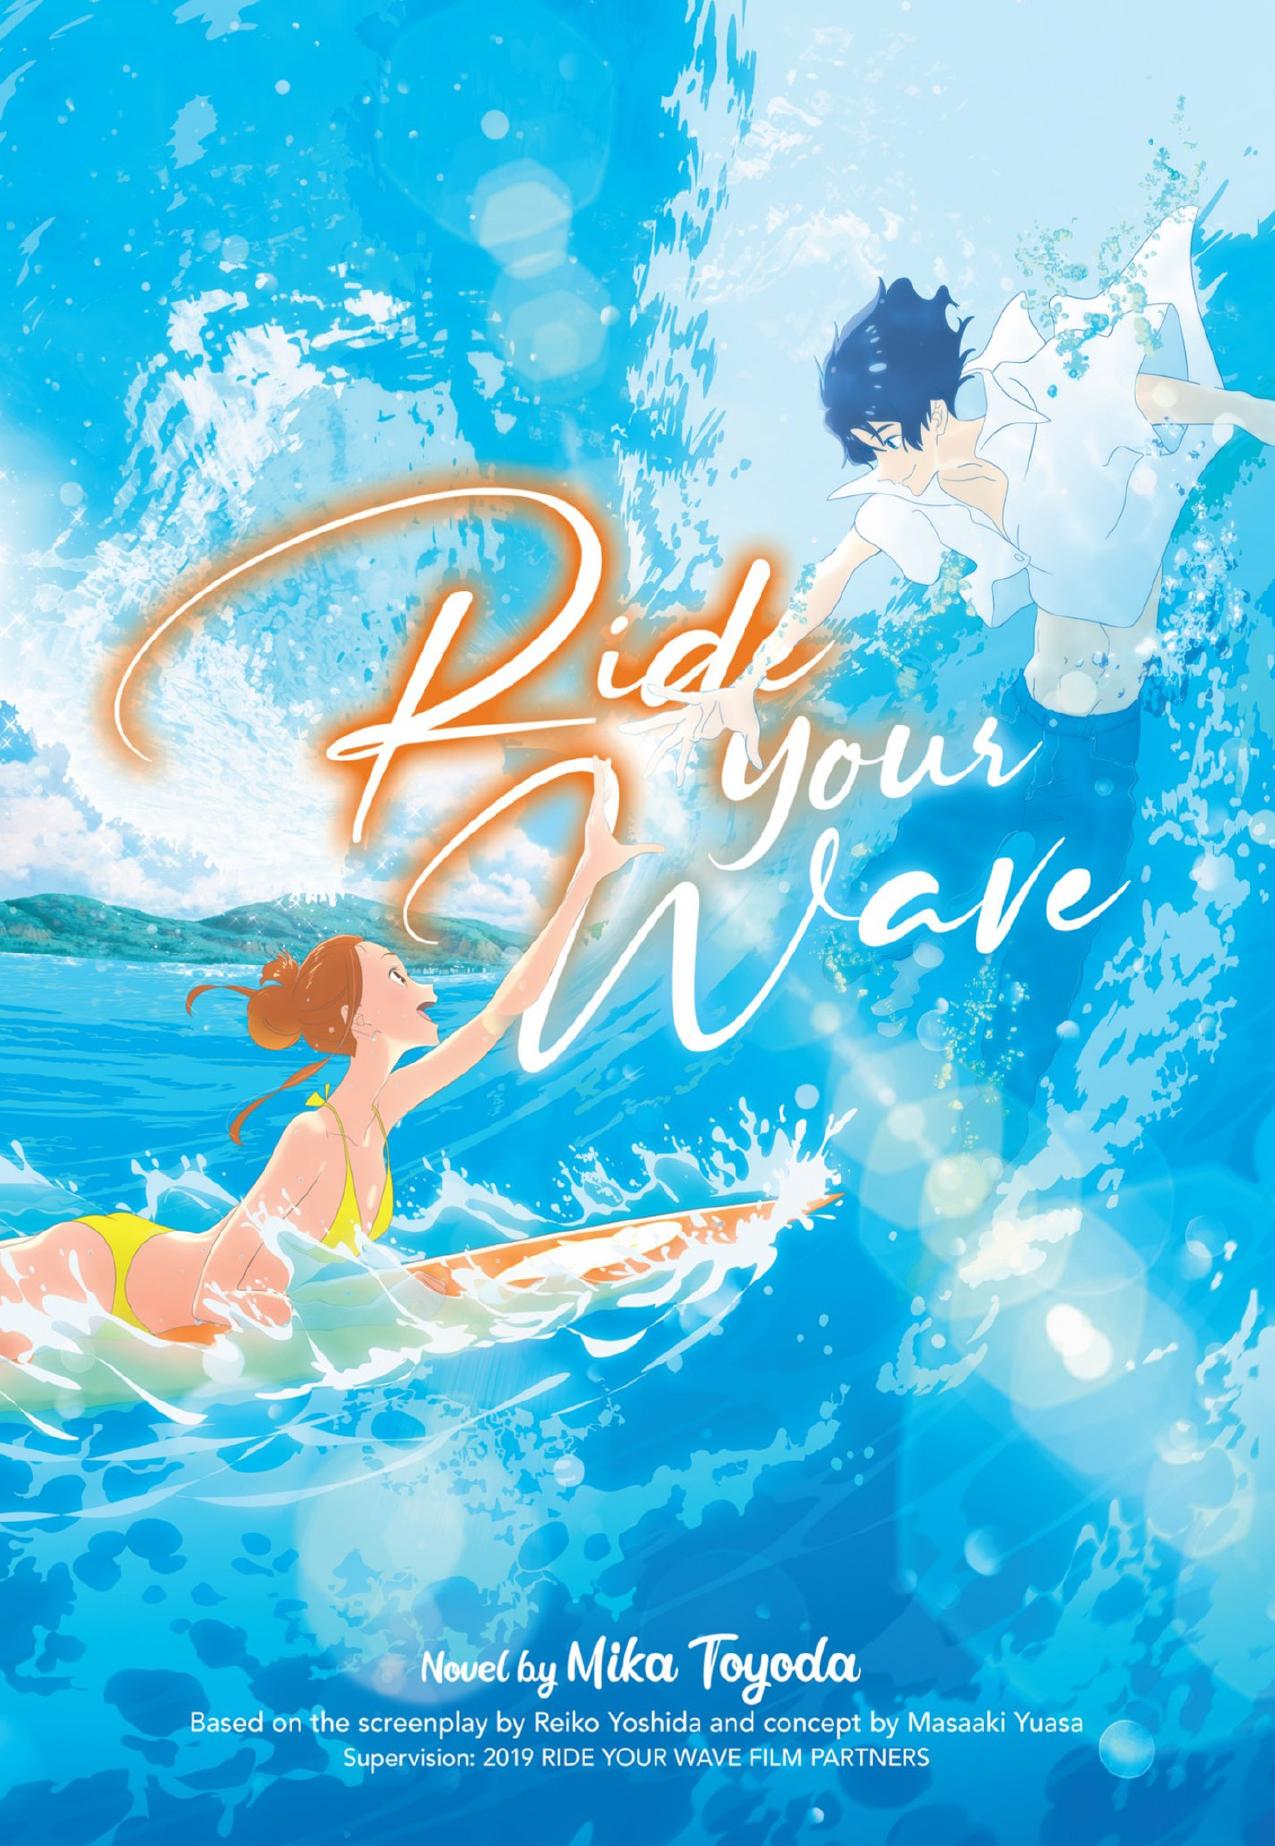 Ride Your Wave by Mika Toyoda